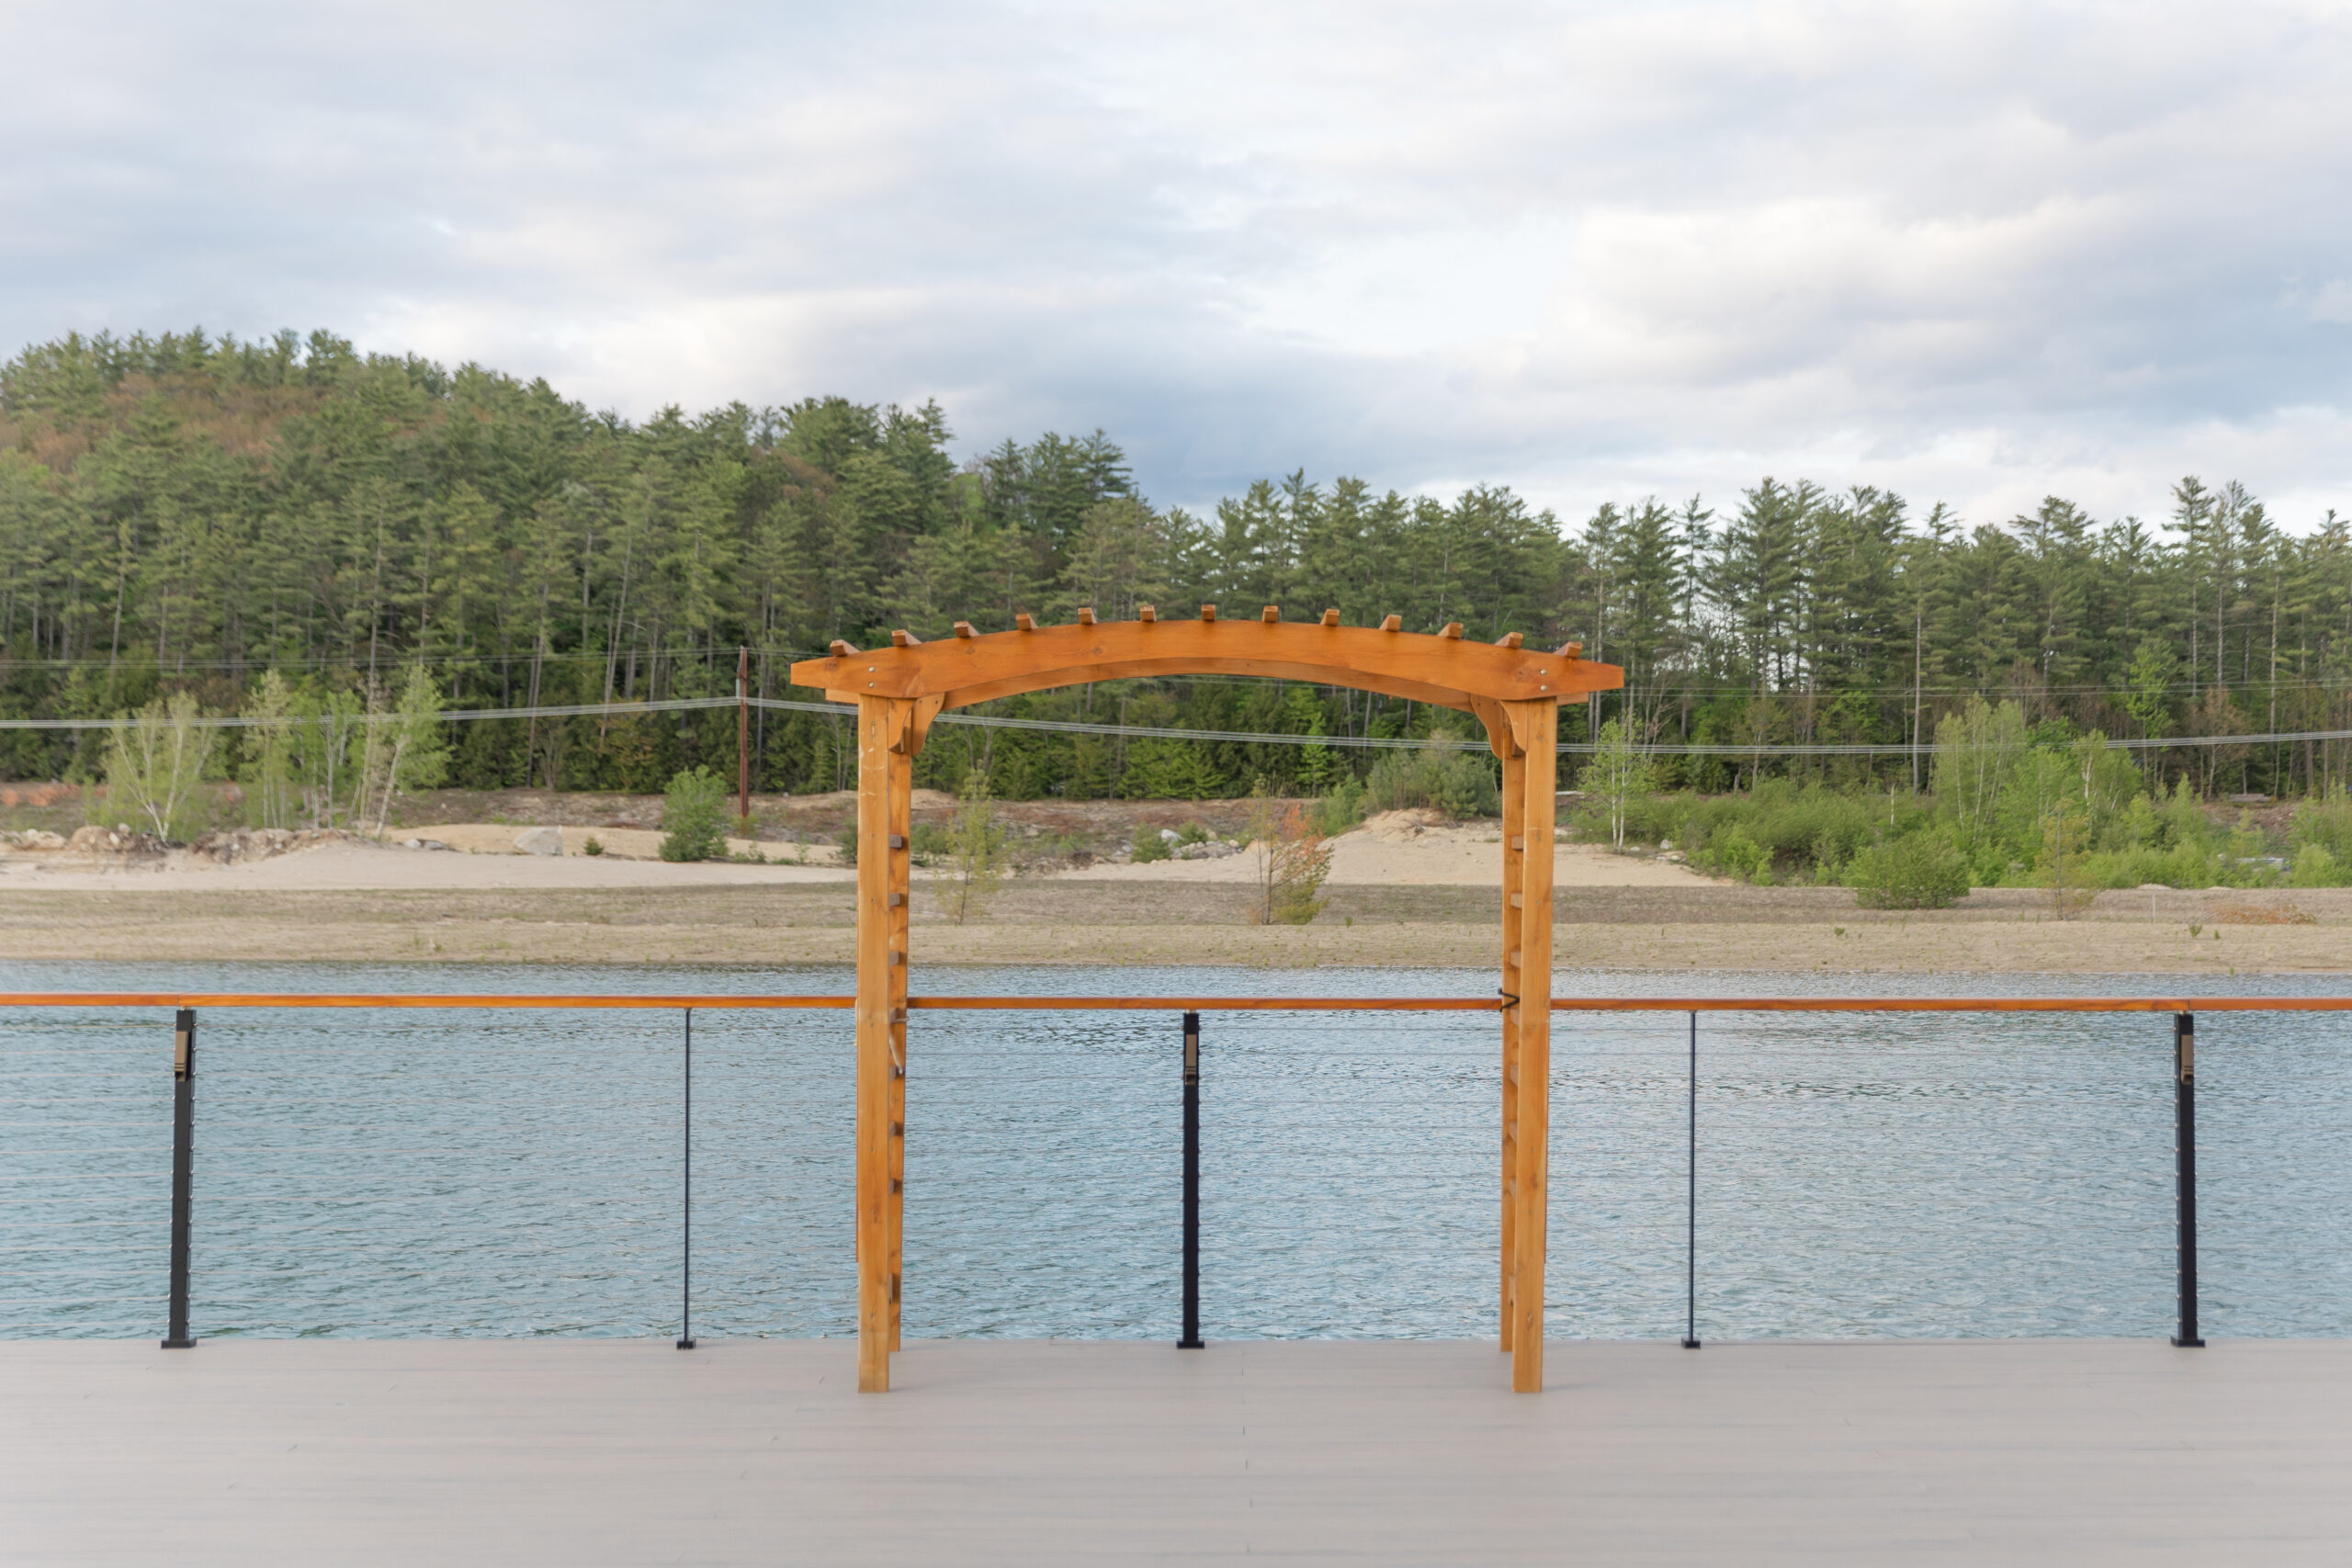 The outdoor deck at the Lake House overlooks the lake and a Pine Knoll in the background. 